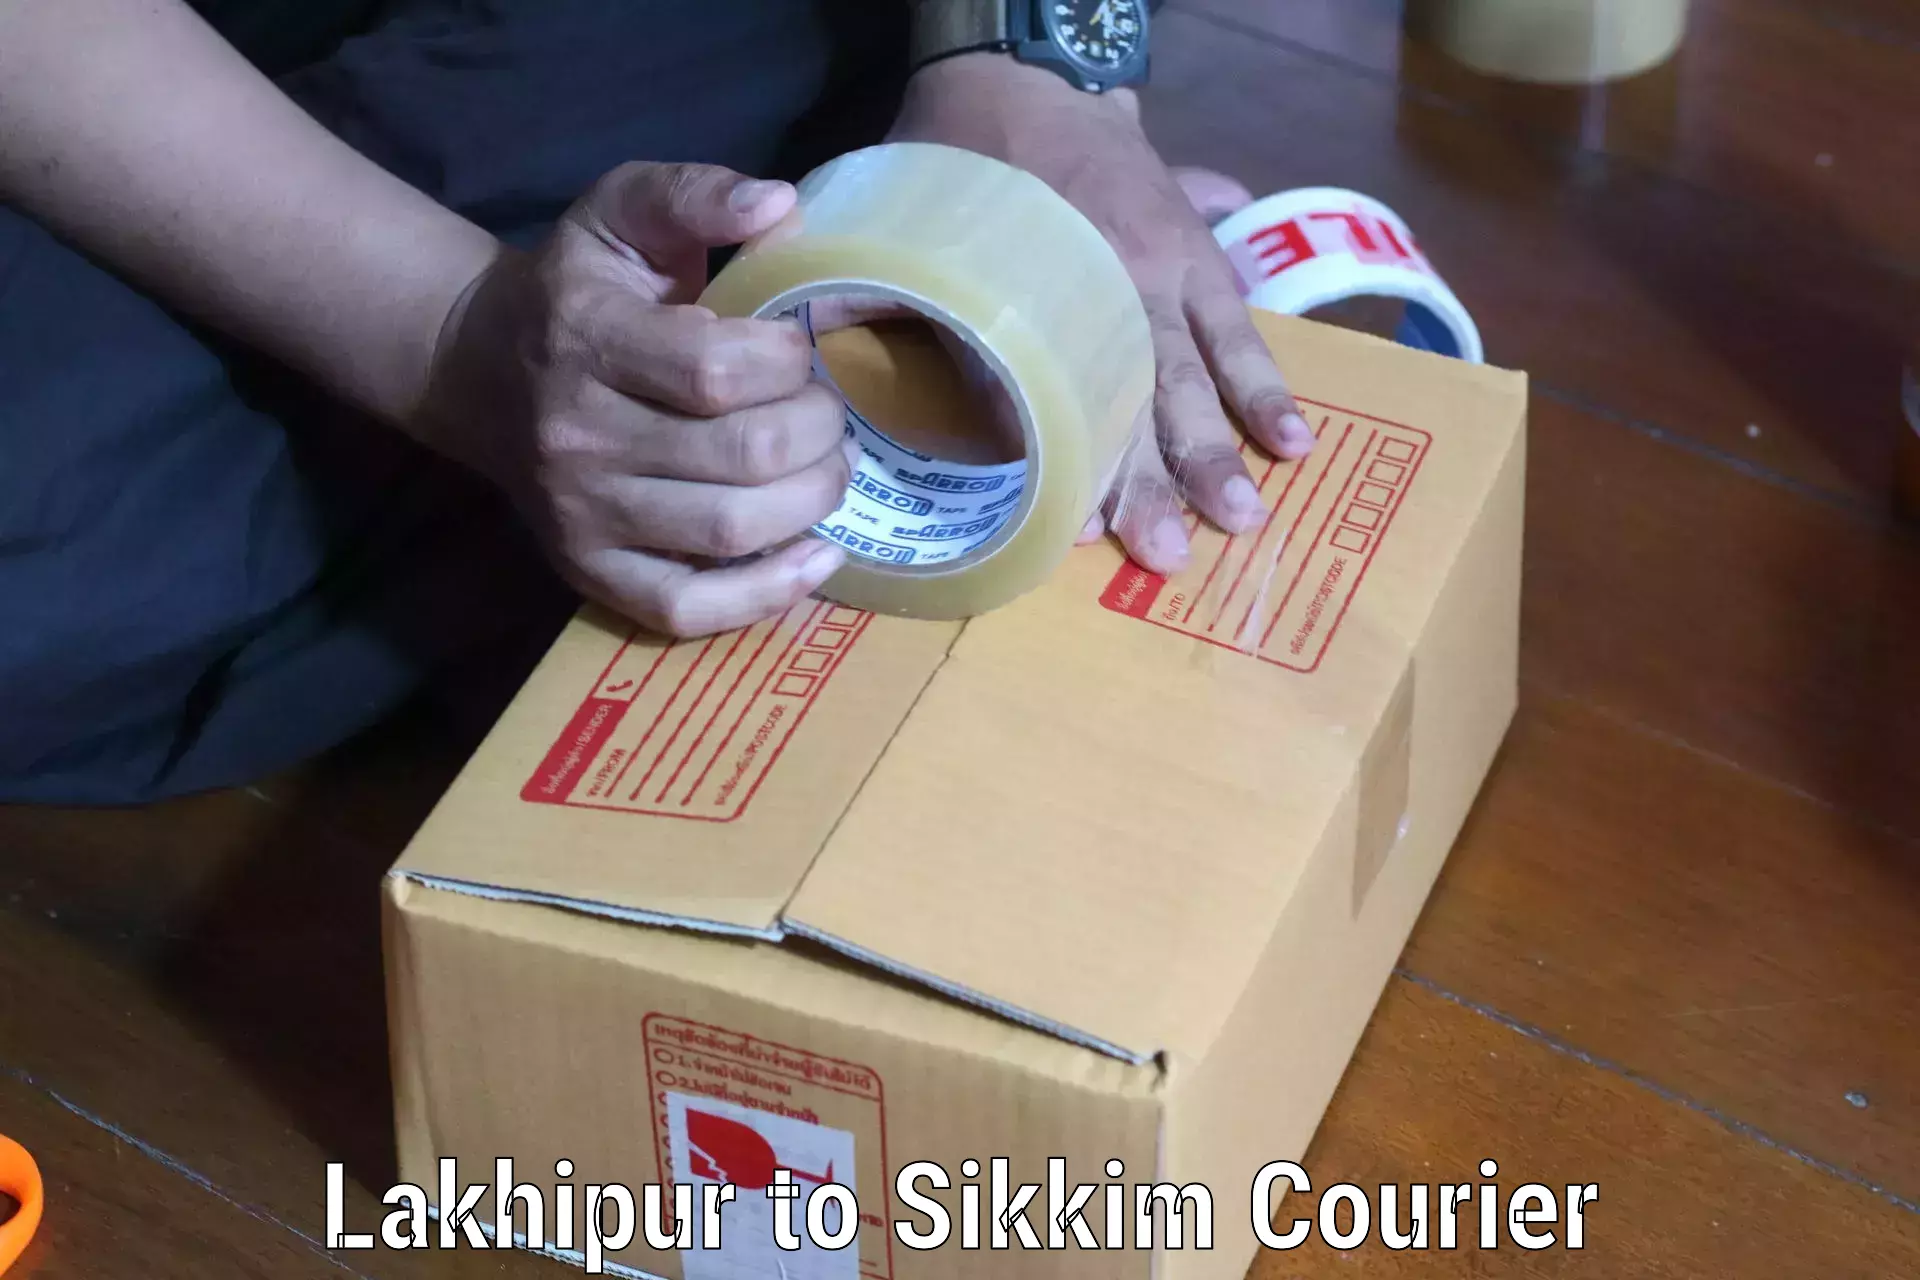 Tech-enabled shipping Lakhipur to Rangpo